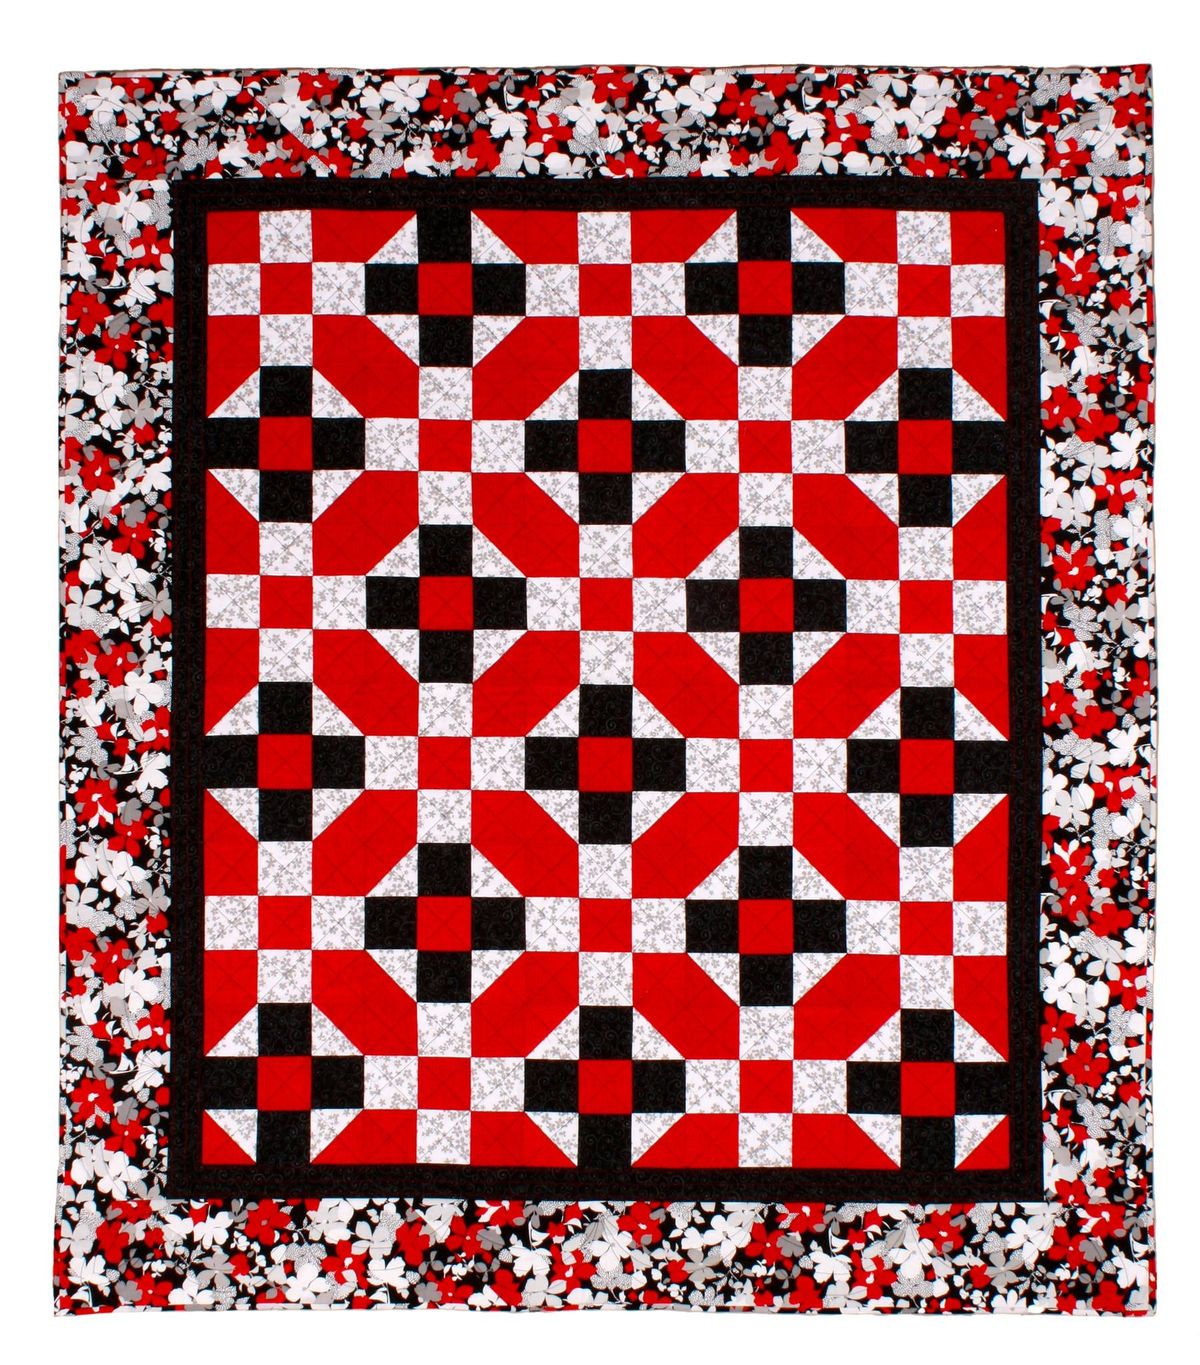 Introduction to Quilt Making